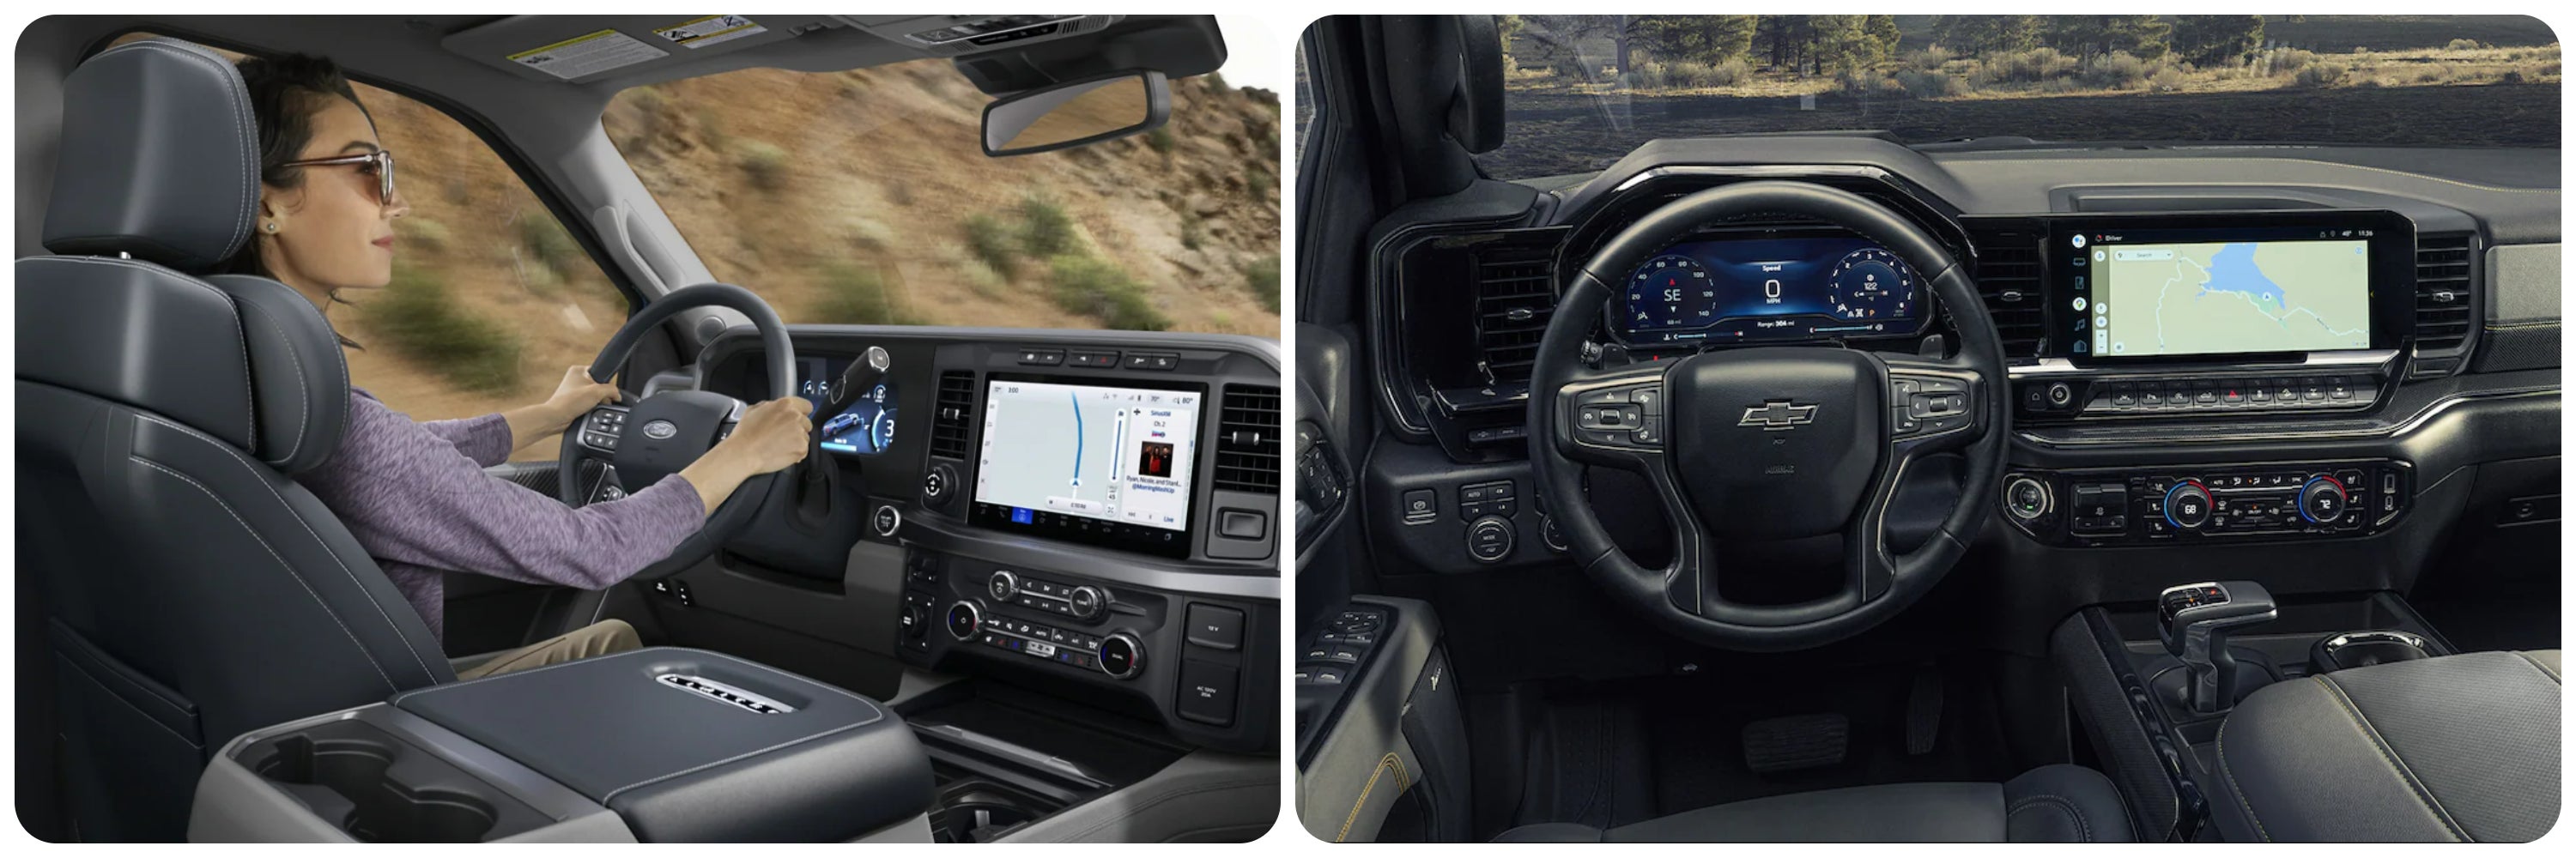 A view of the dash and infotainment systems of the 2023 Ford Super Duty on the left and the 2023 Chevy Silverado on the right.